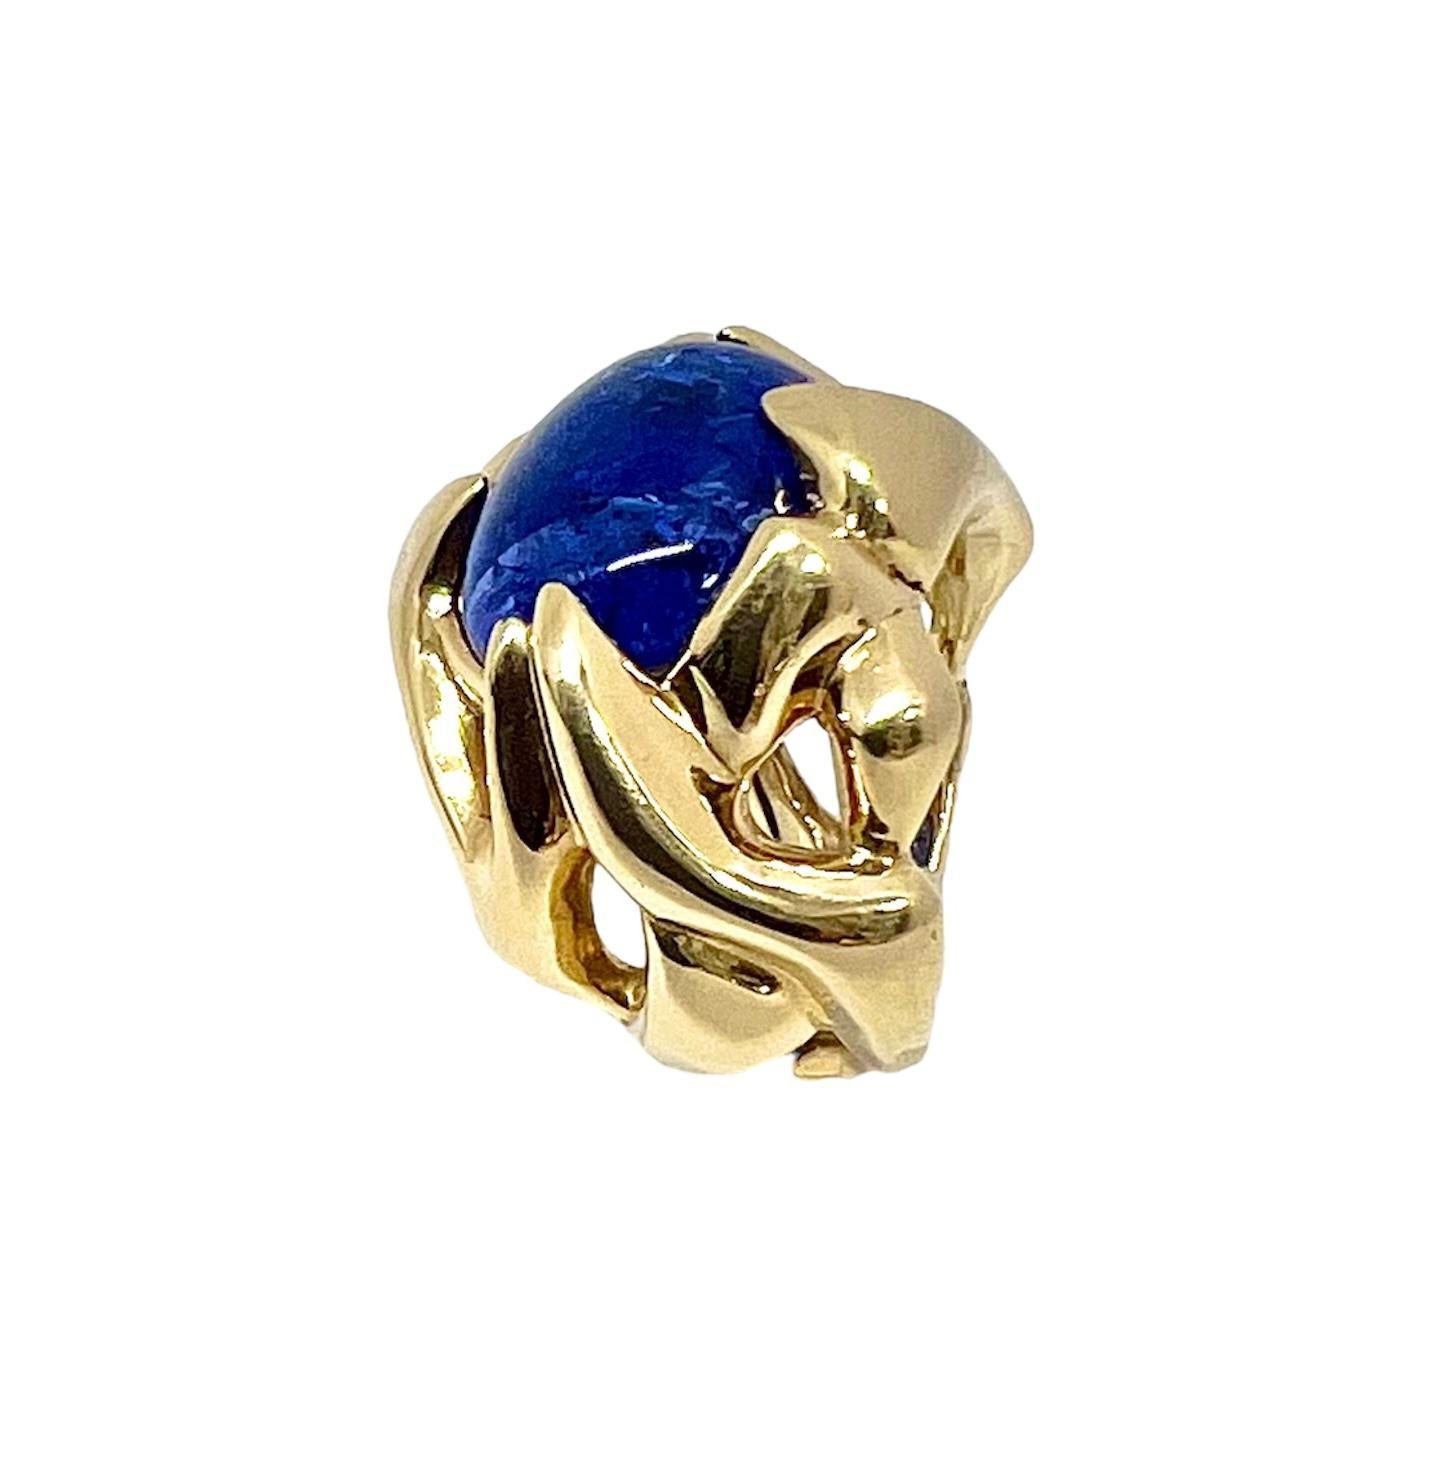 One of a Kind Cocktail Ring with 10 Carat Cabochon Tanzanite For Sale 1